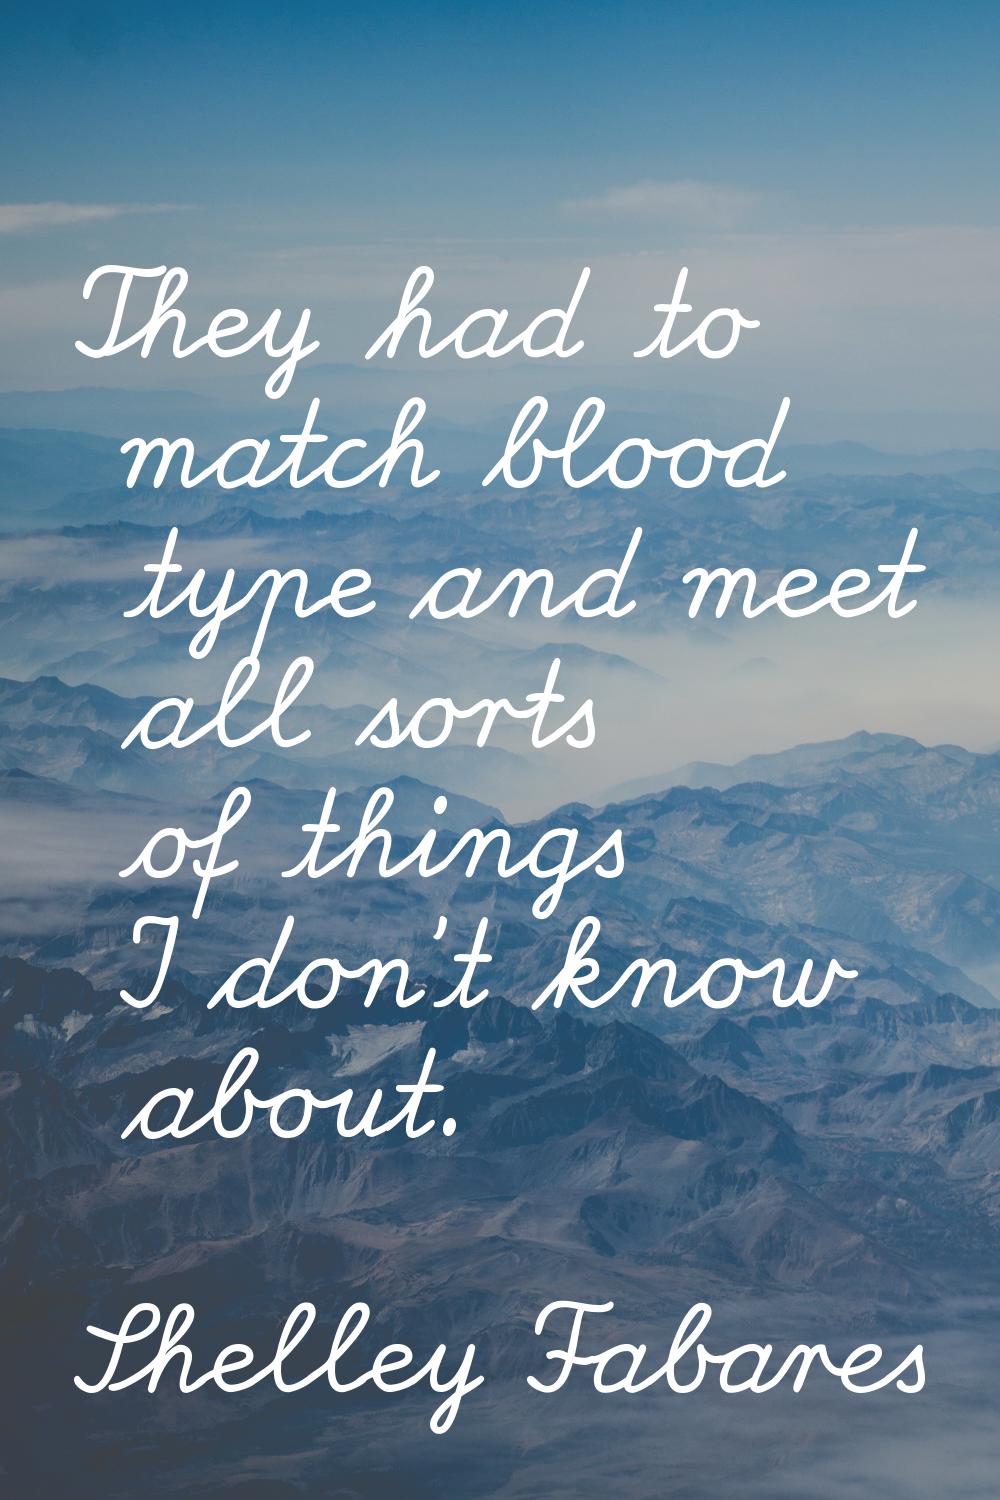 They had to match blood type and meet all sorts of things I don't know about.